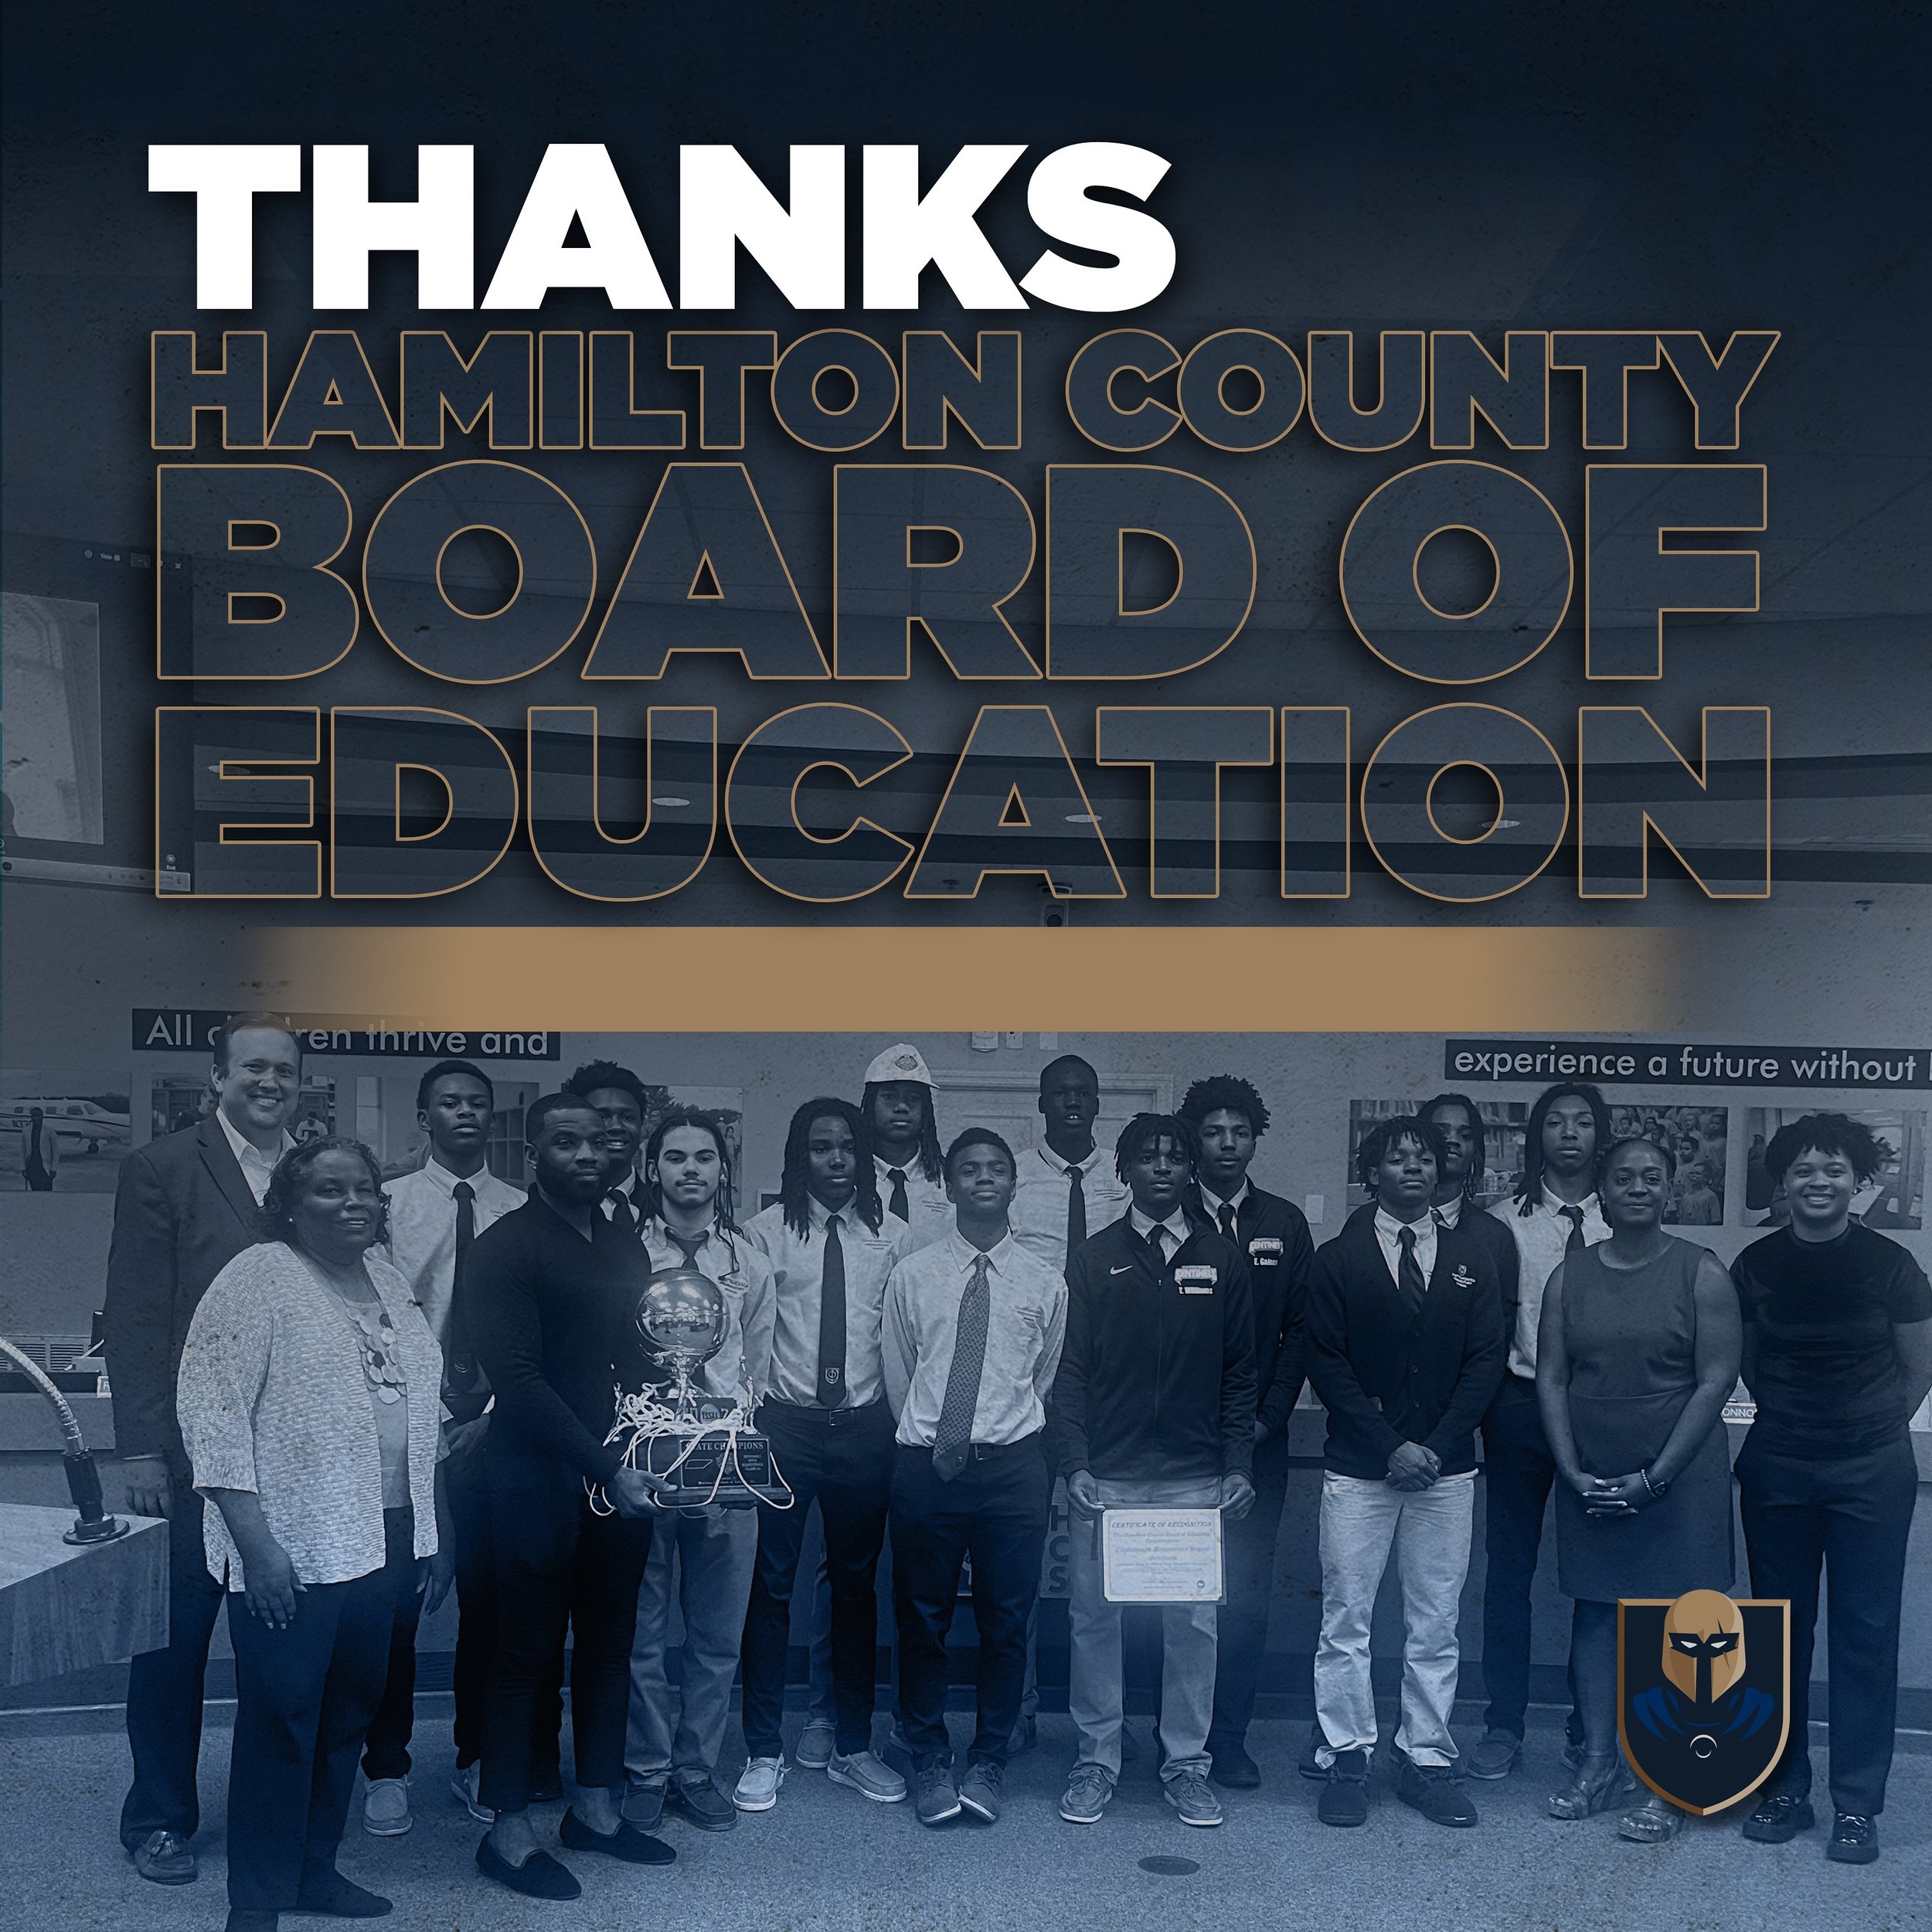 We&rsquo;re beyond grateful for the continued recognition from our city and county! Thanks to the @hamiltoncountyschools school board for recognizing our athletes during yesterday&rsquo;s meeting!!!
&bull;&bull;&bull;&bull;&bull;
#chattprep #statecha